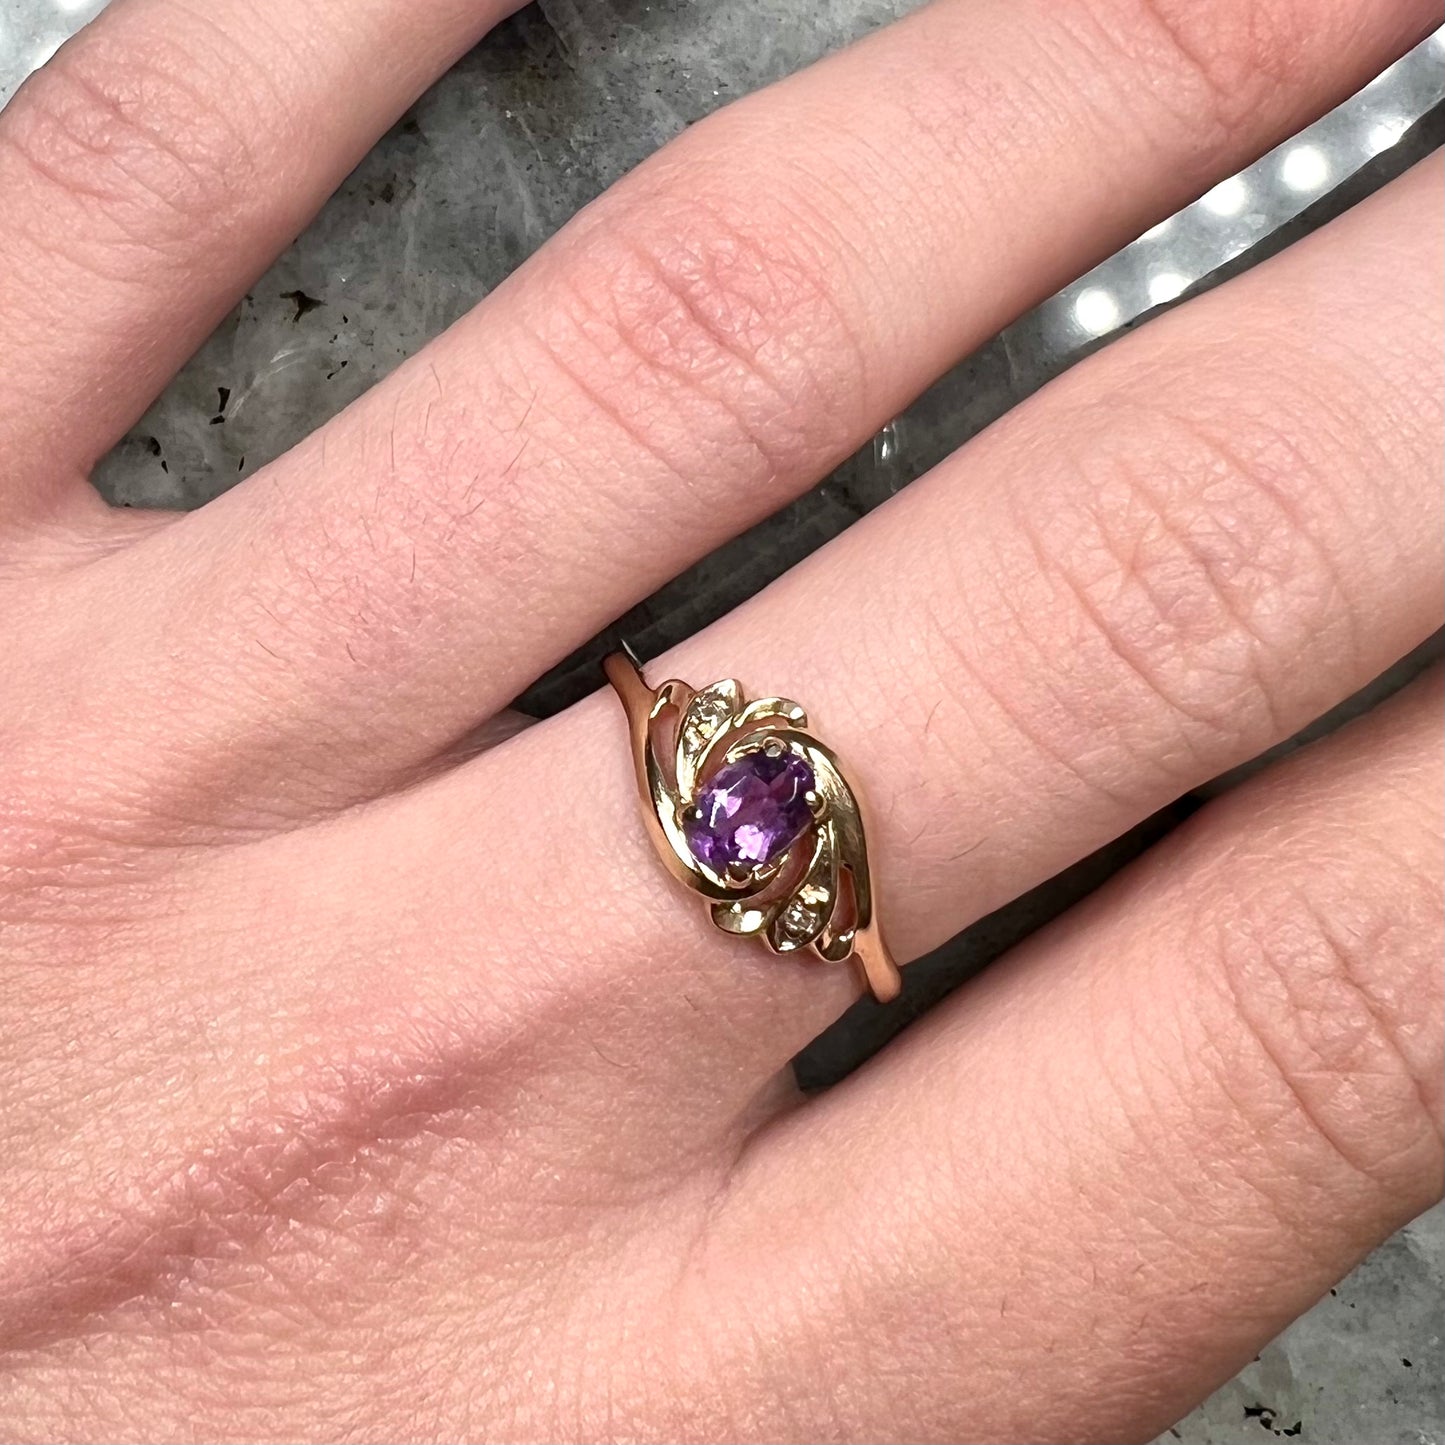 A yellow gold oval cut amethyst and diamond accent ladies' ring.